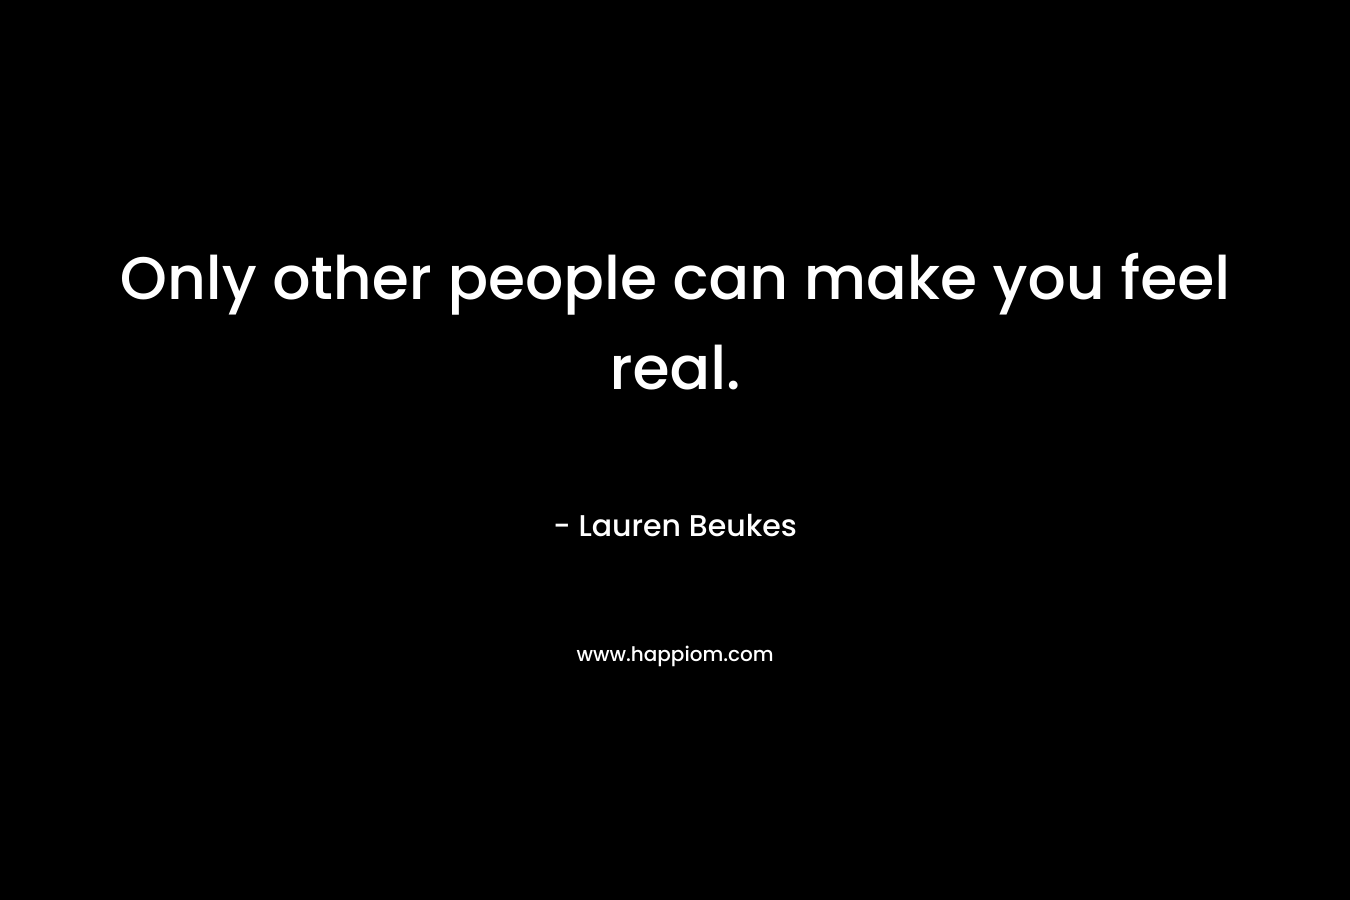 Only other people can make you feel real.